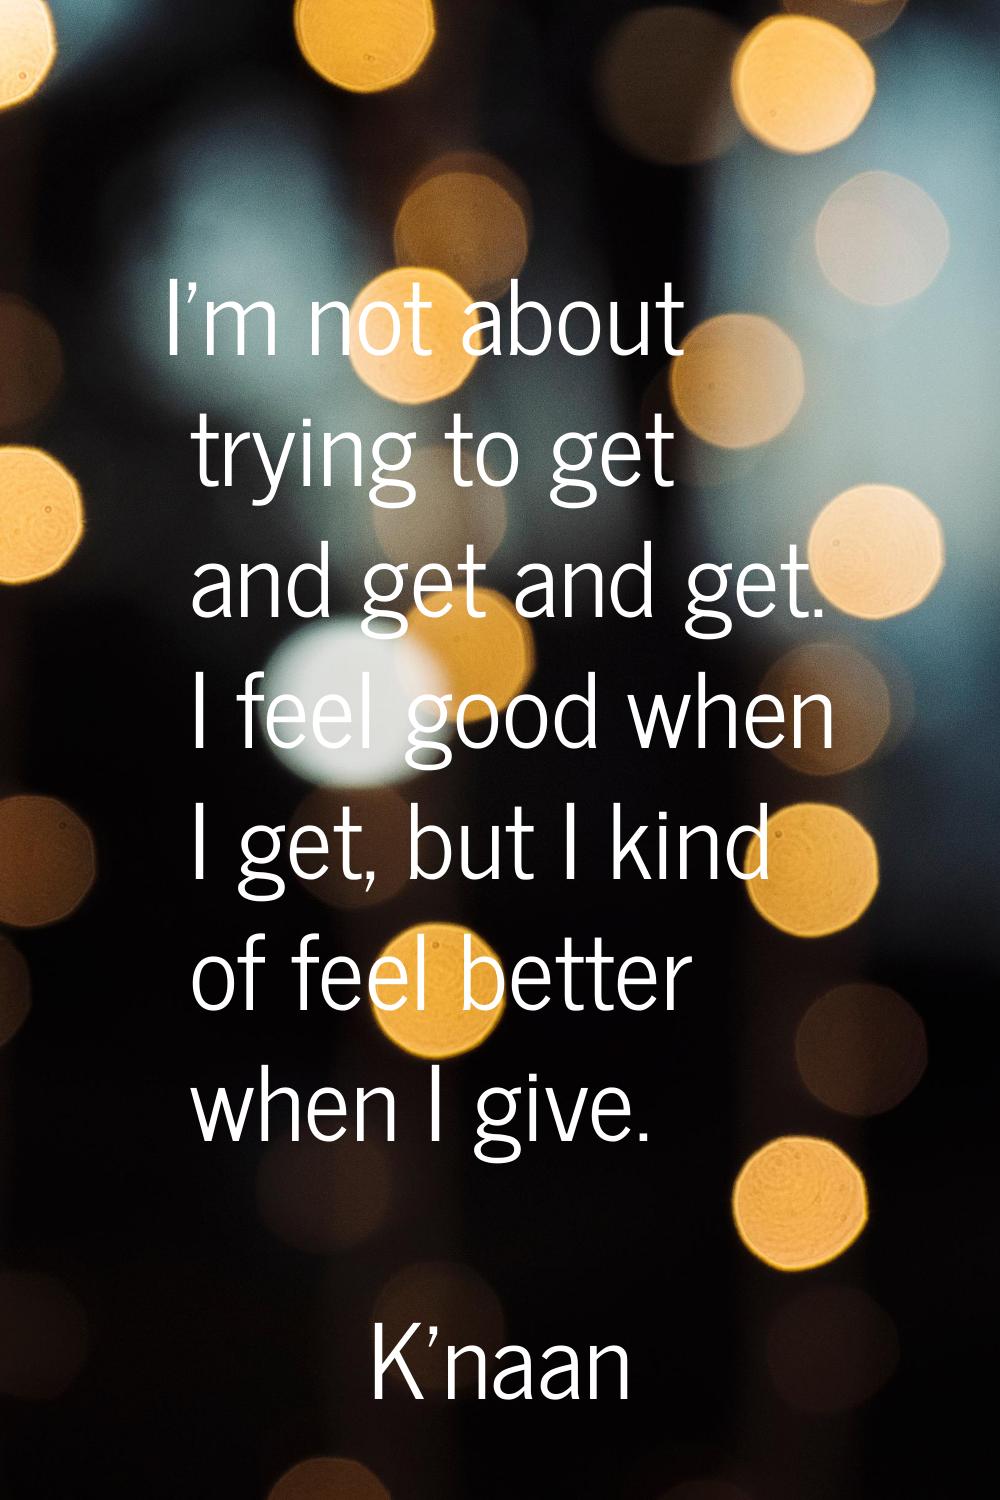 I'm not about trying to get and get and get. I feel good when I get, but I kind of feel better when